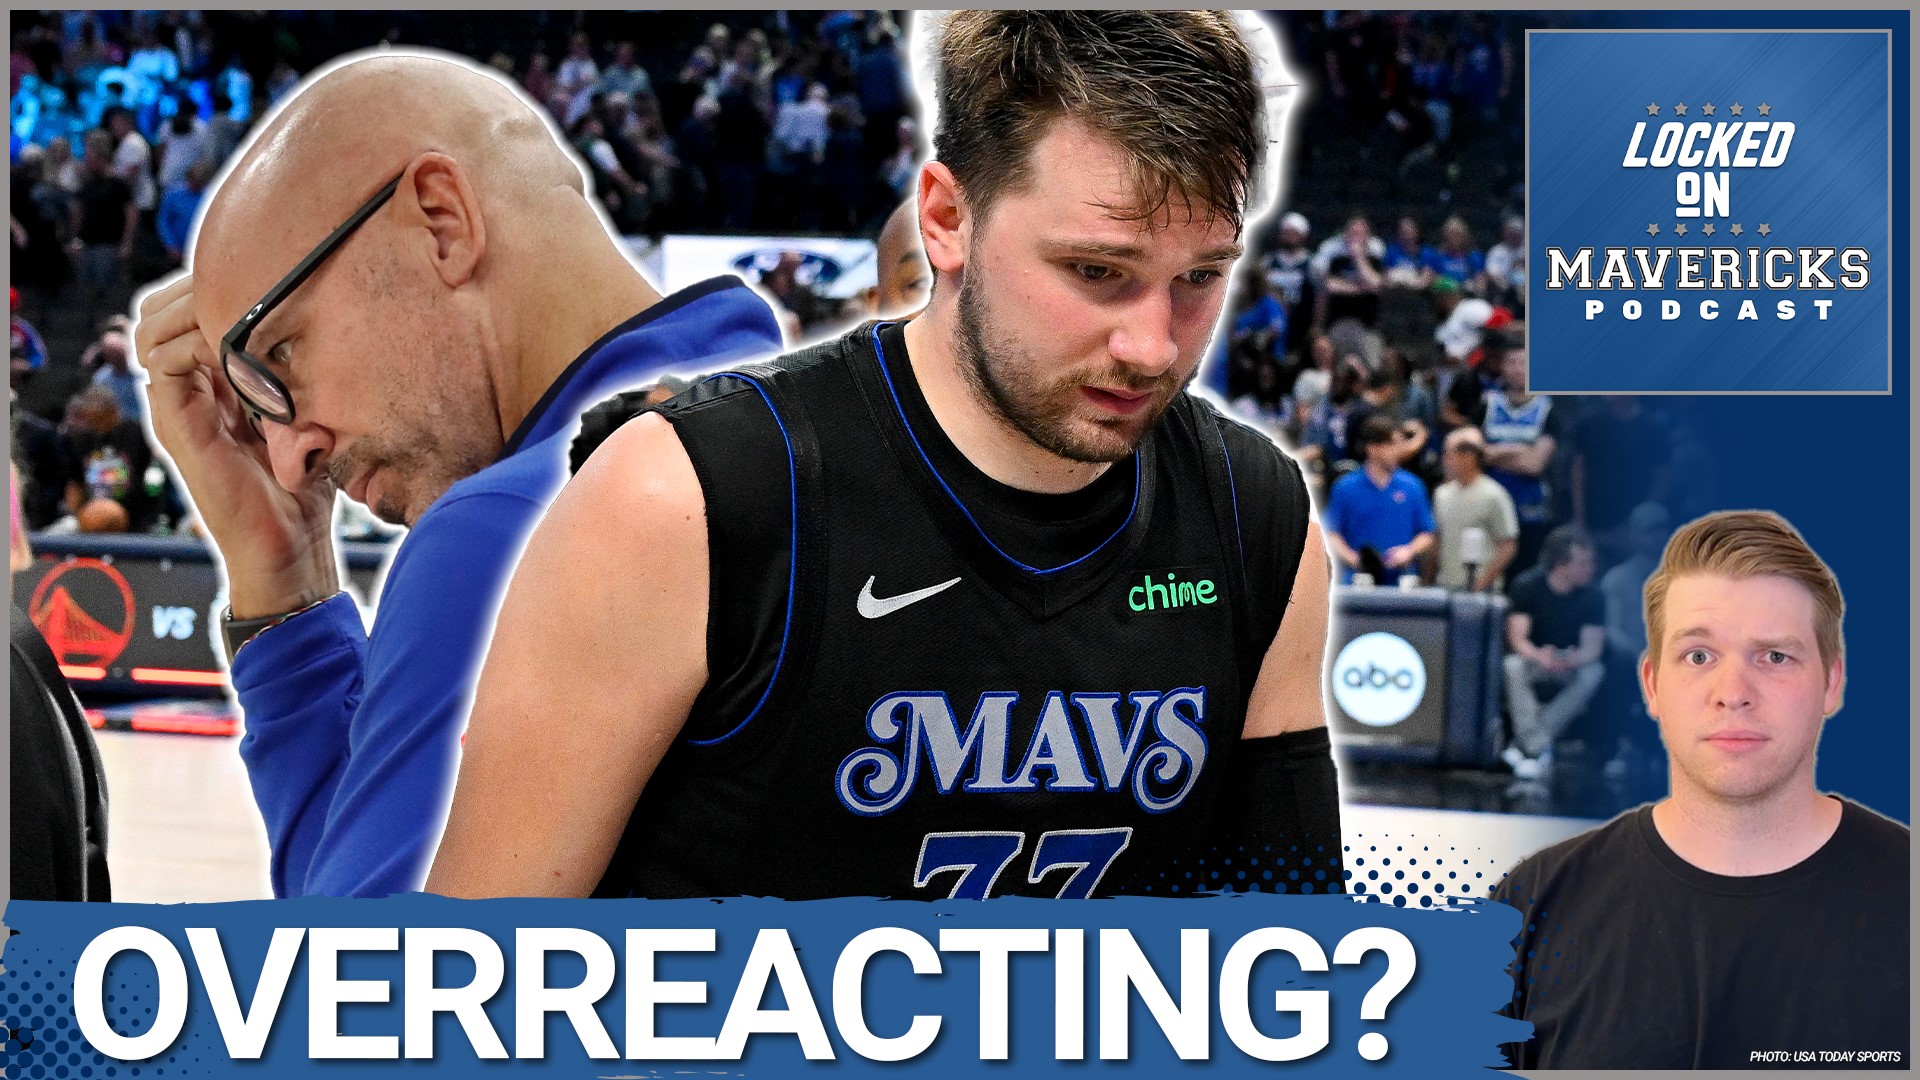 Nick Angstadt answers your questions about the Dallas Mavericks' recent losses, wanting to fire Jason Kidd, and the good Starting 5 with Luka Doncic & Kyrie Irving.